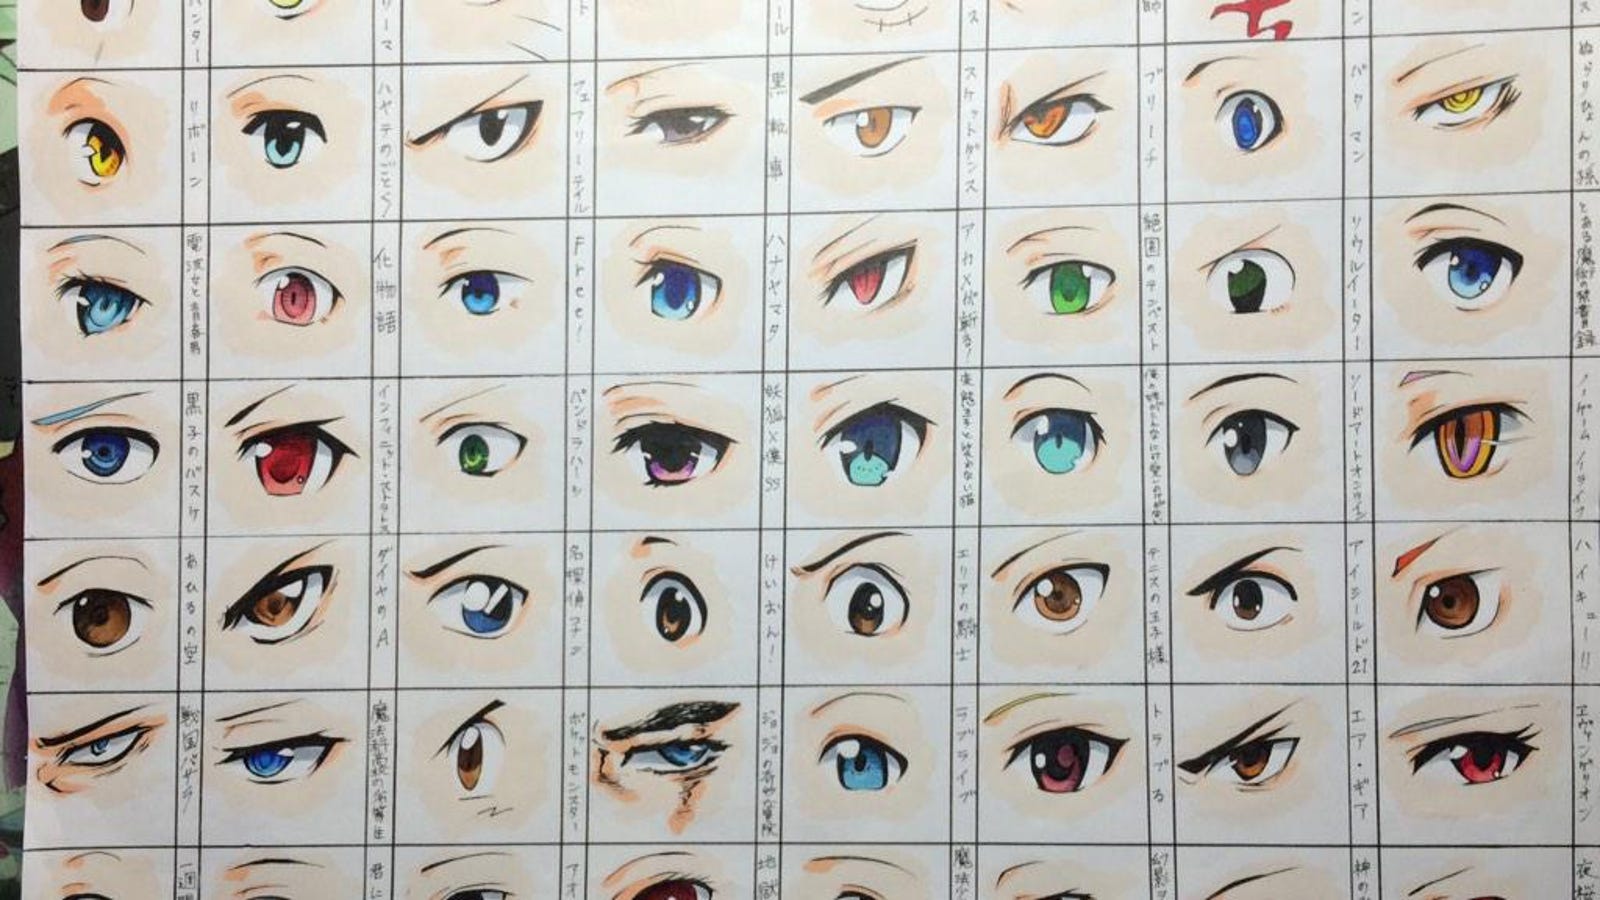 Can You Identify These Anime Eyes? Go On and Try.